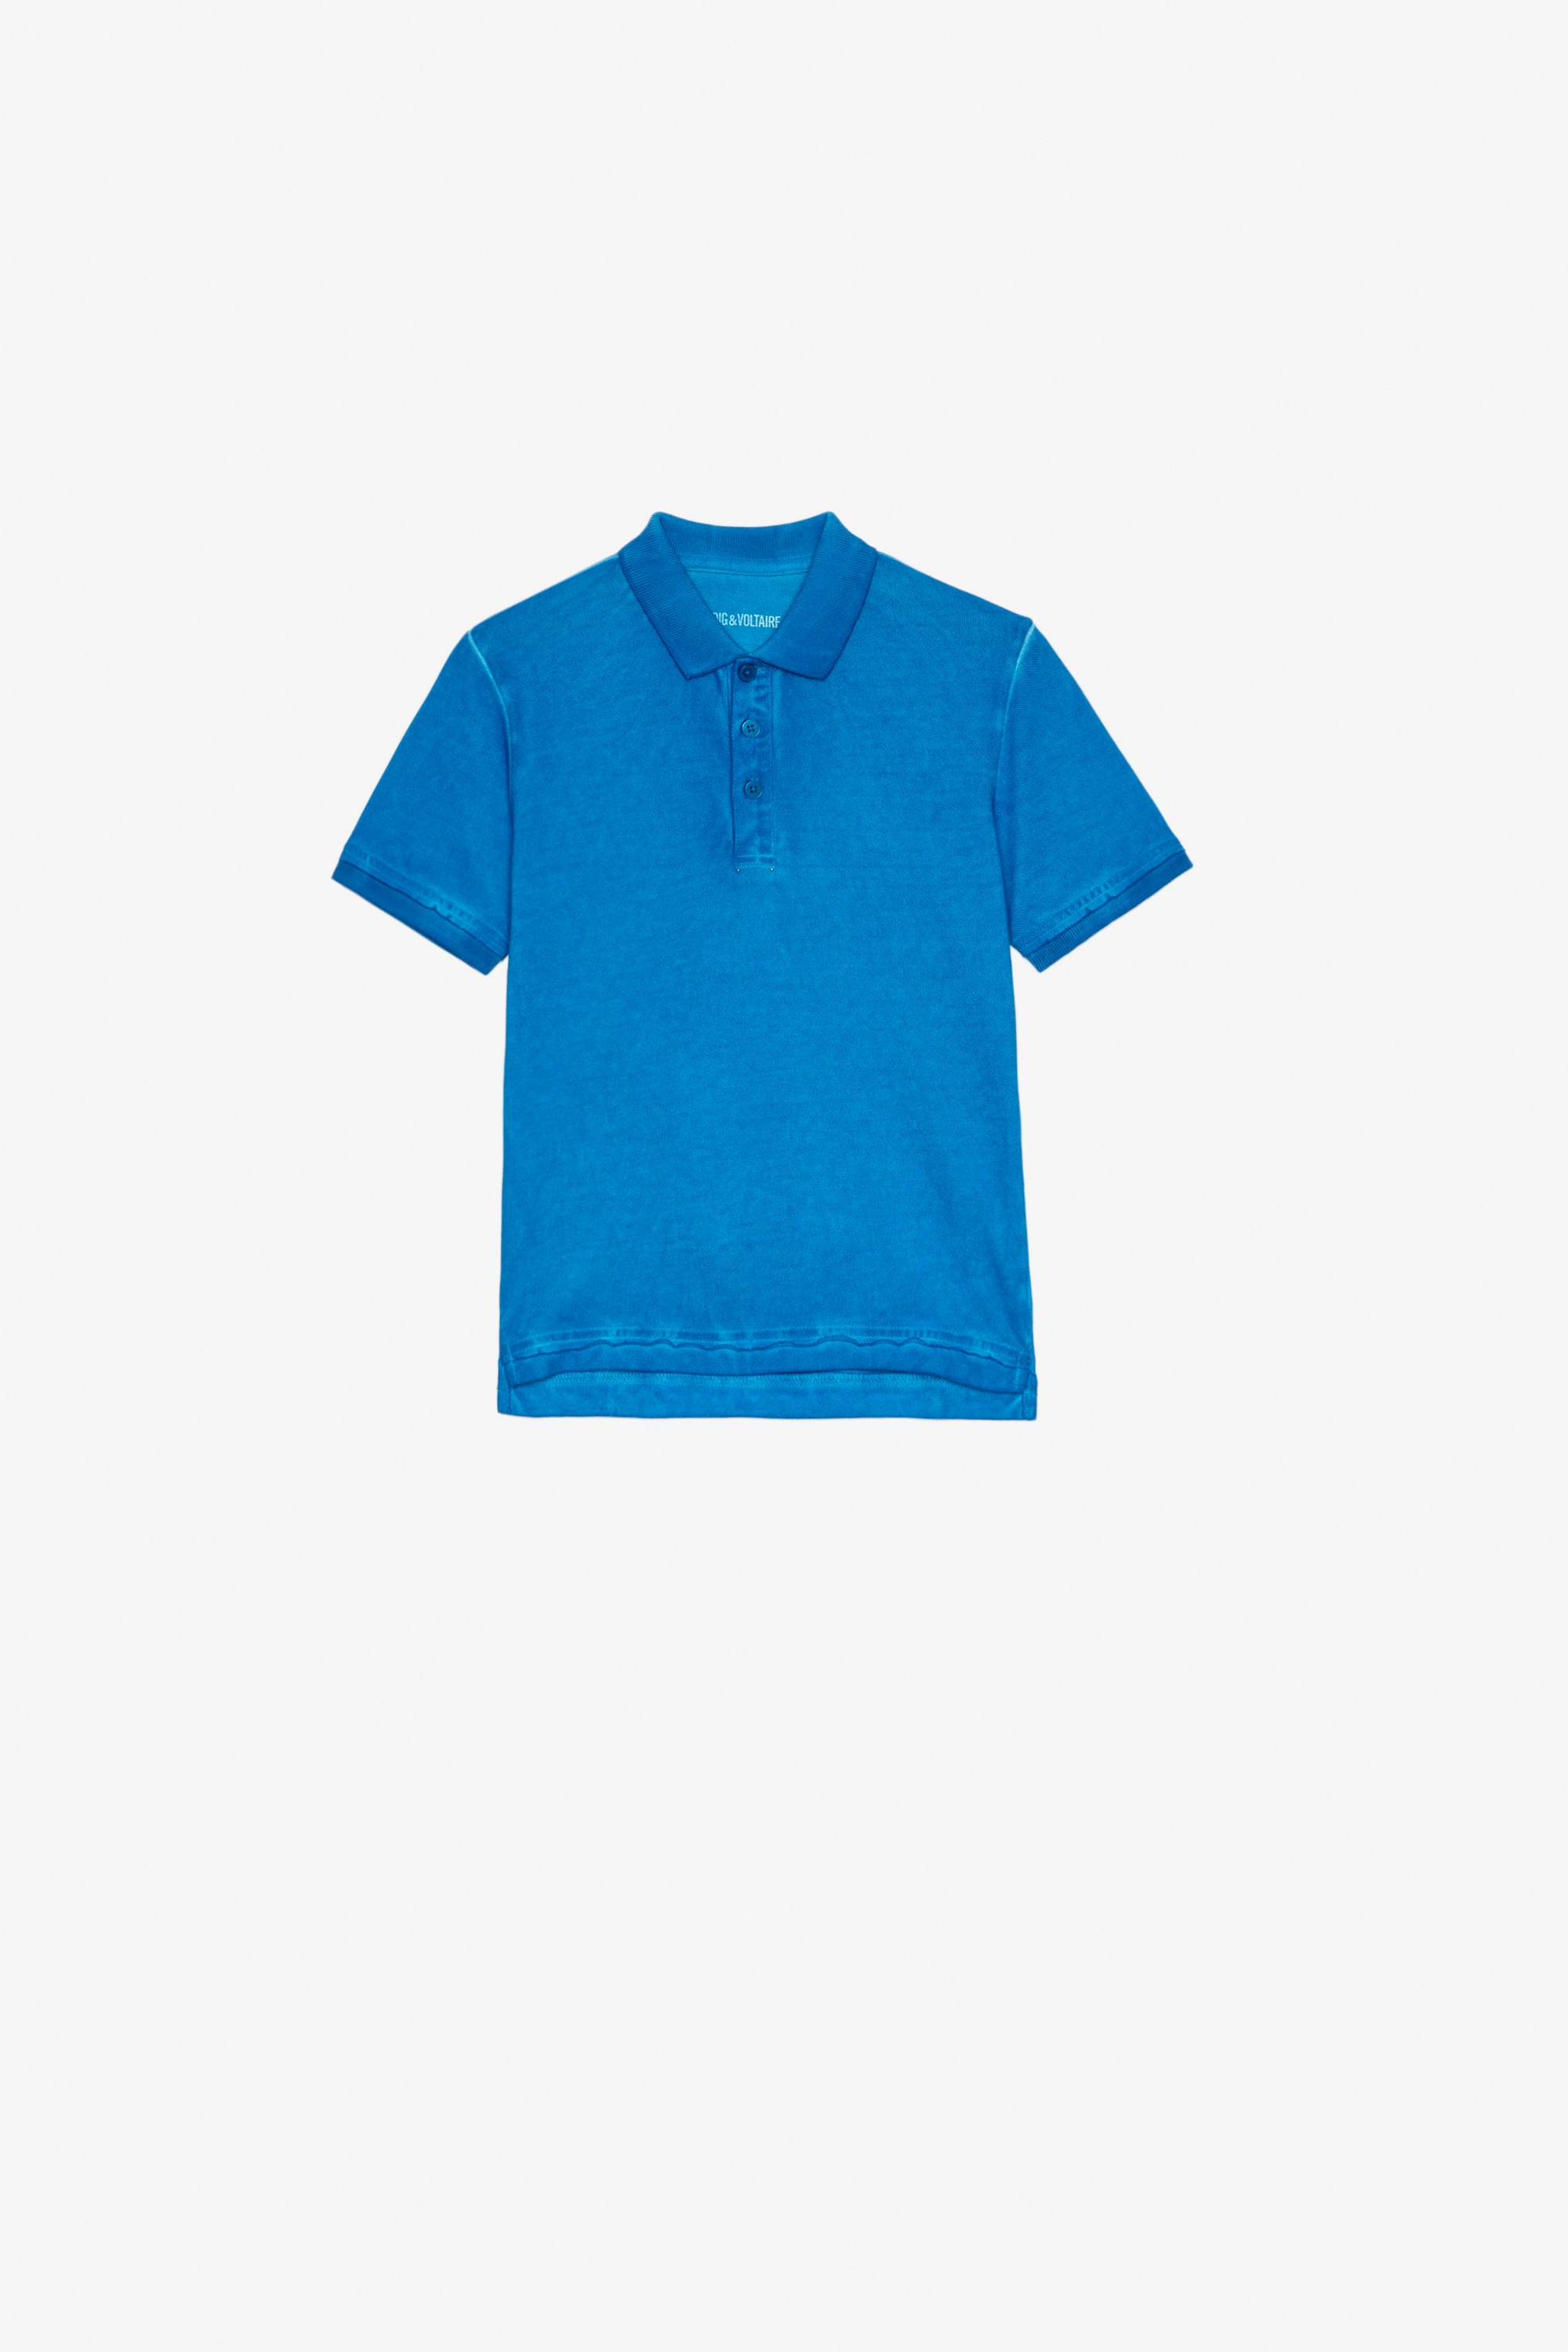 Trot Kids’ Polo Shirt undefined